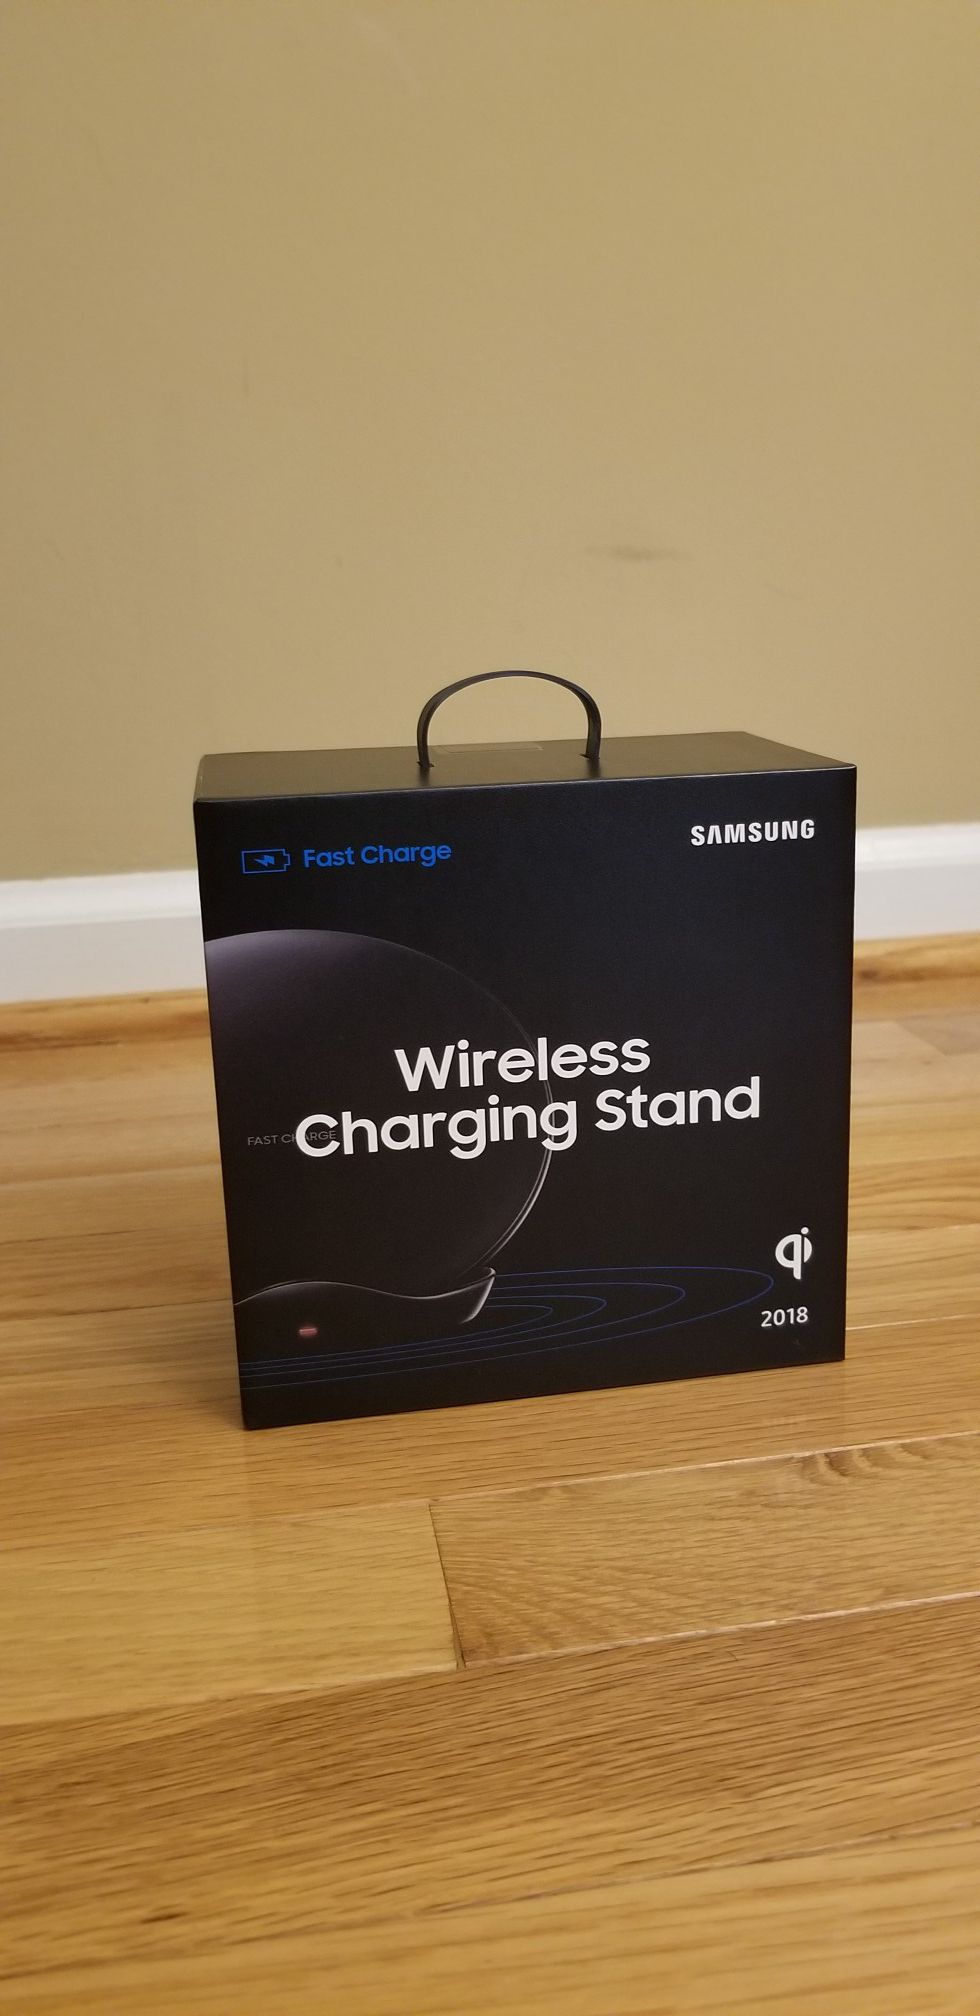 Samsung Fast Charge Wireless Charger w/Charging Stand, Black/SEALED